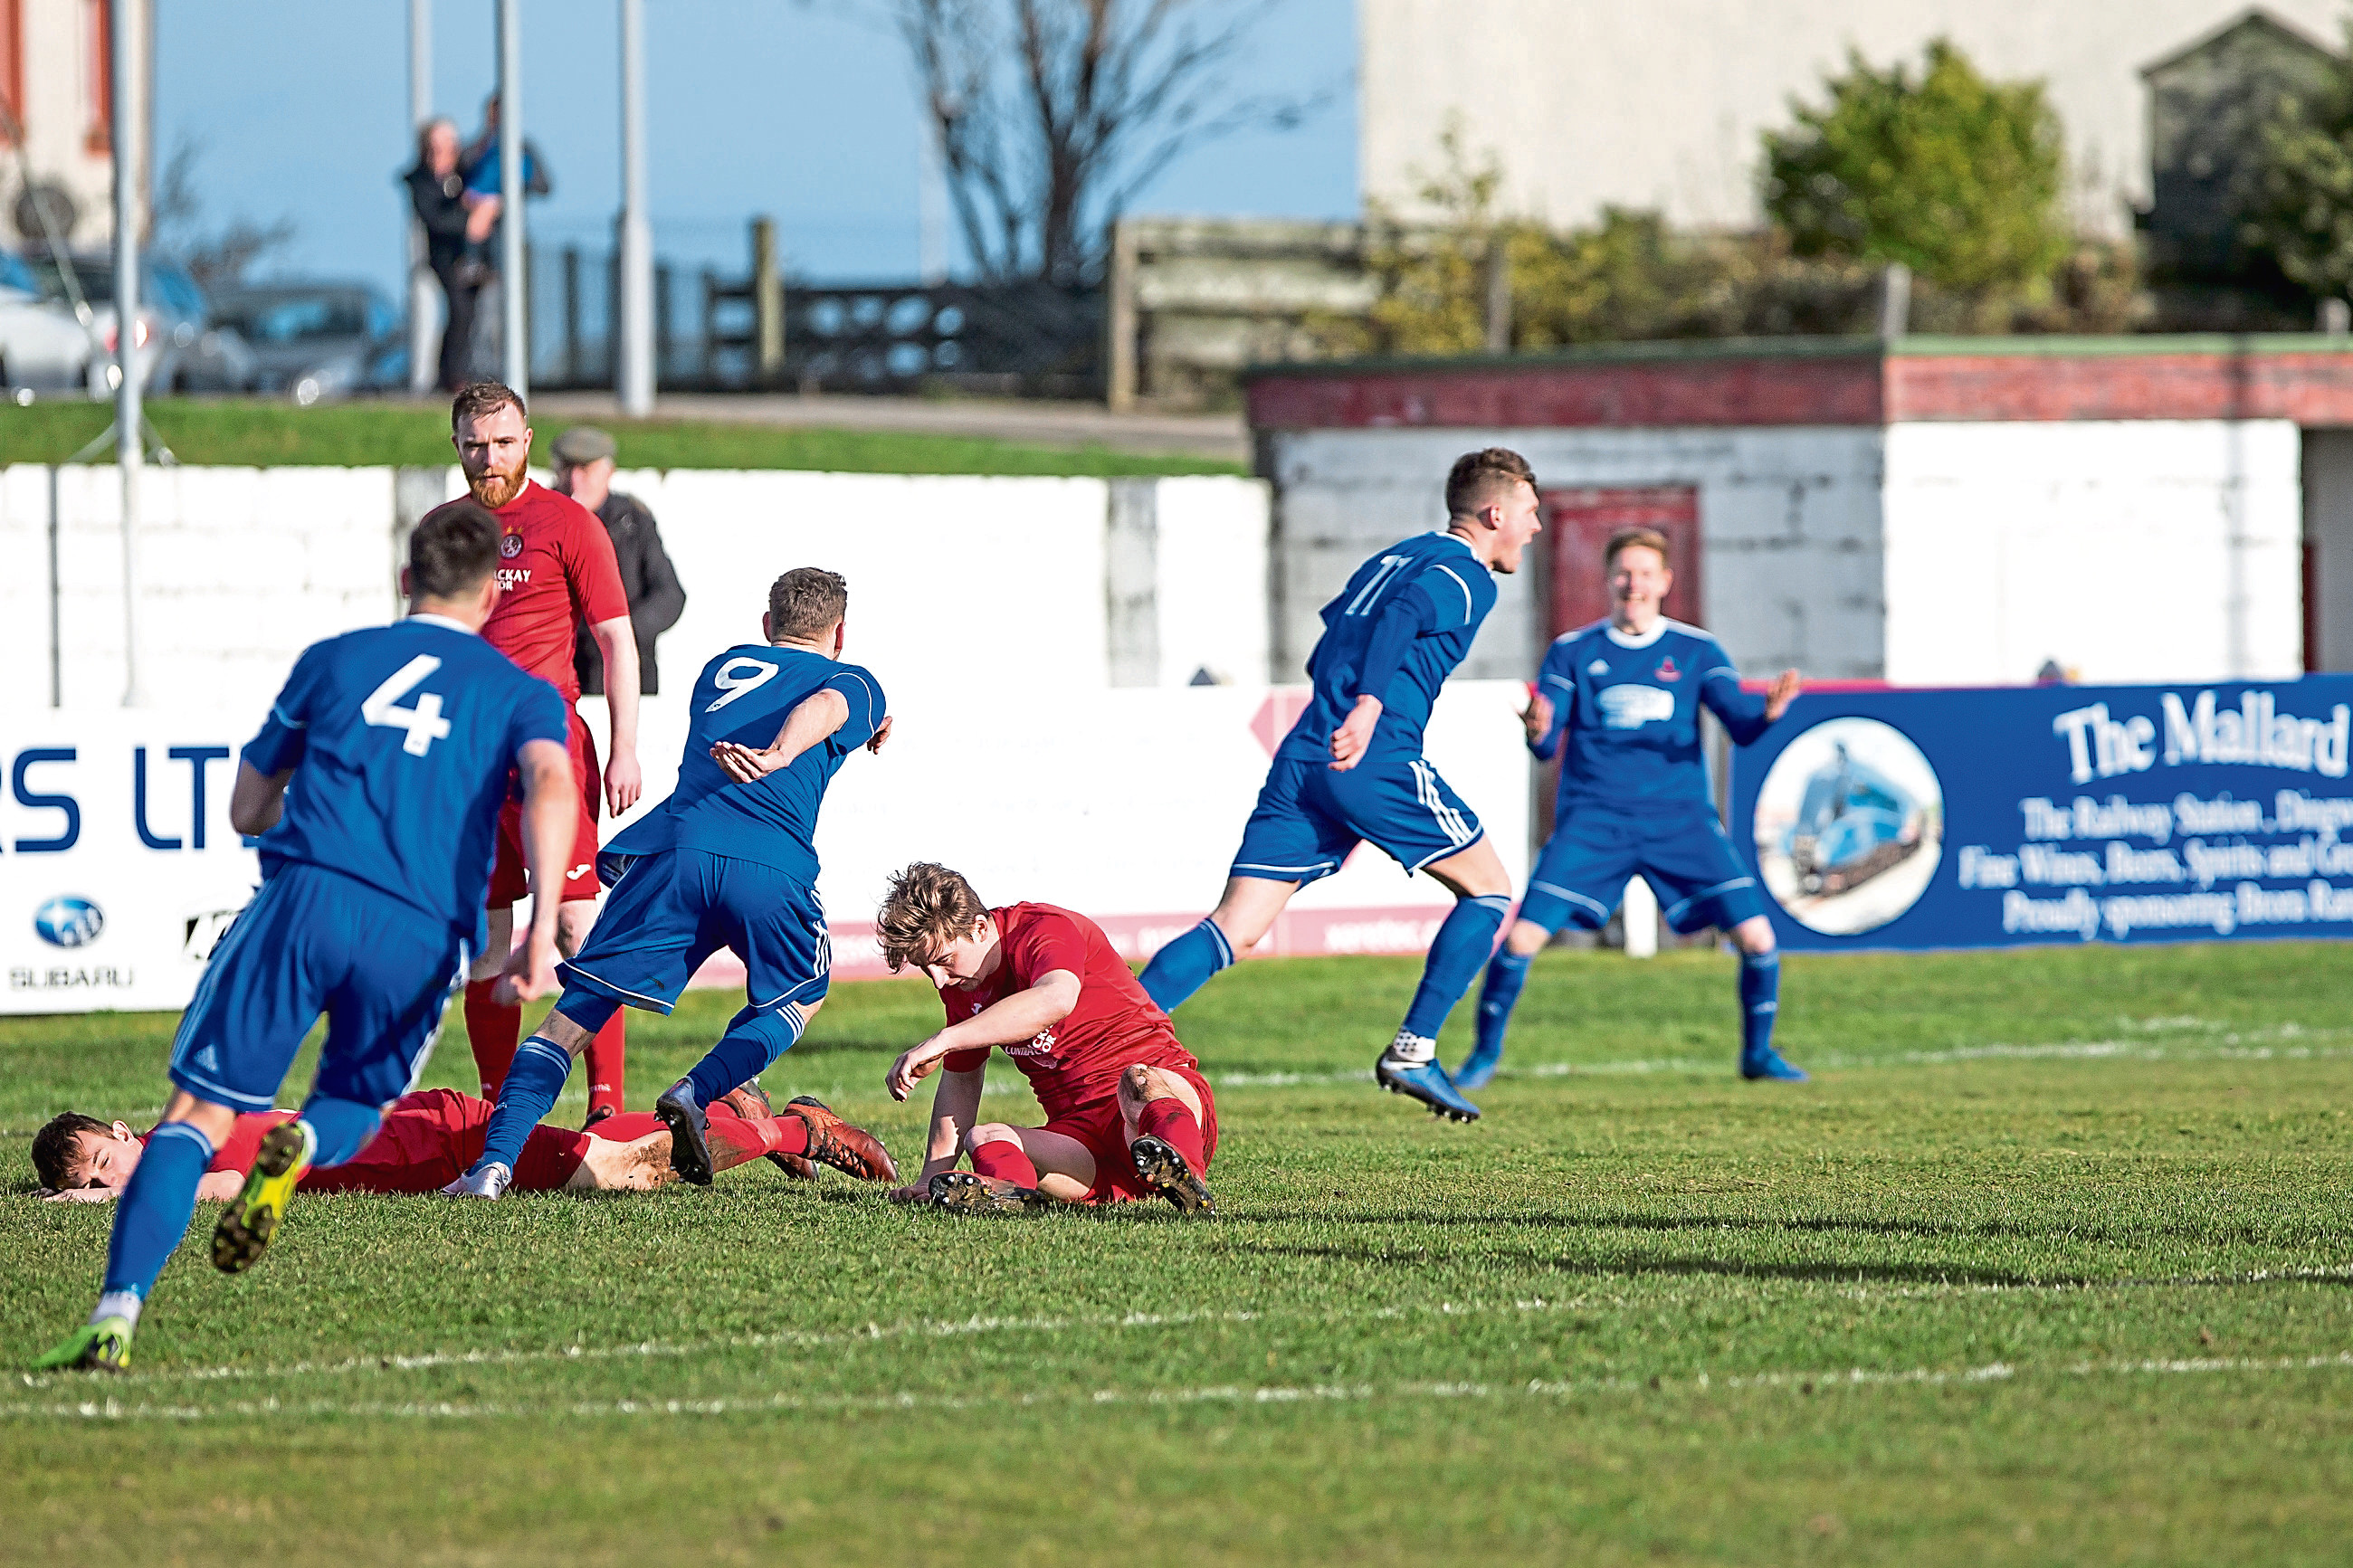 Cove's Jamie Masson's celebrate as he slots home the equaliser